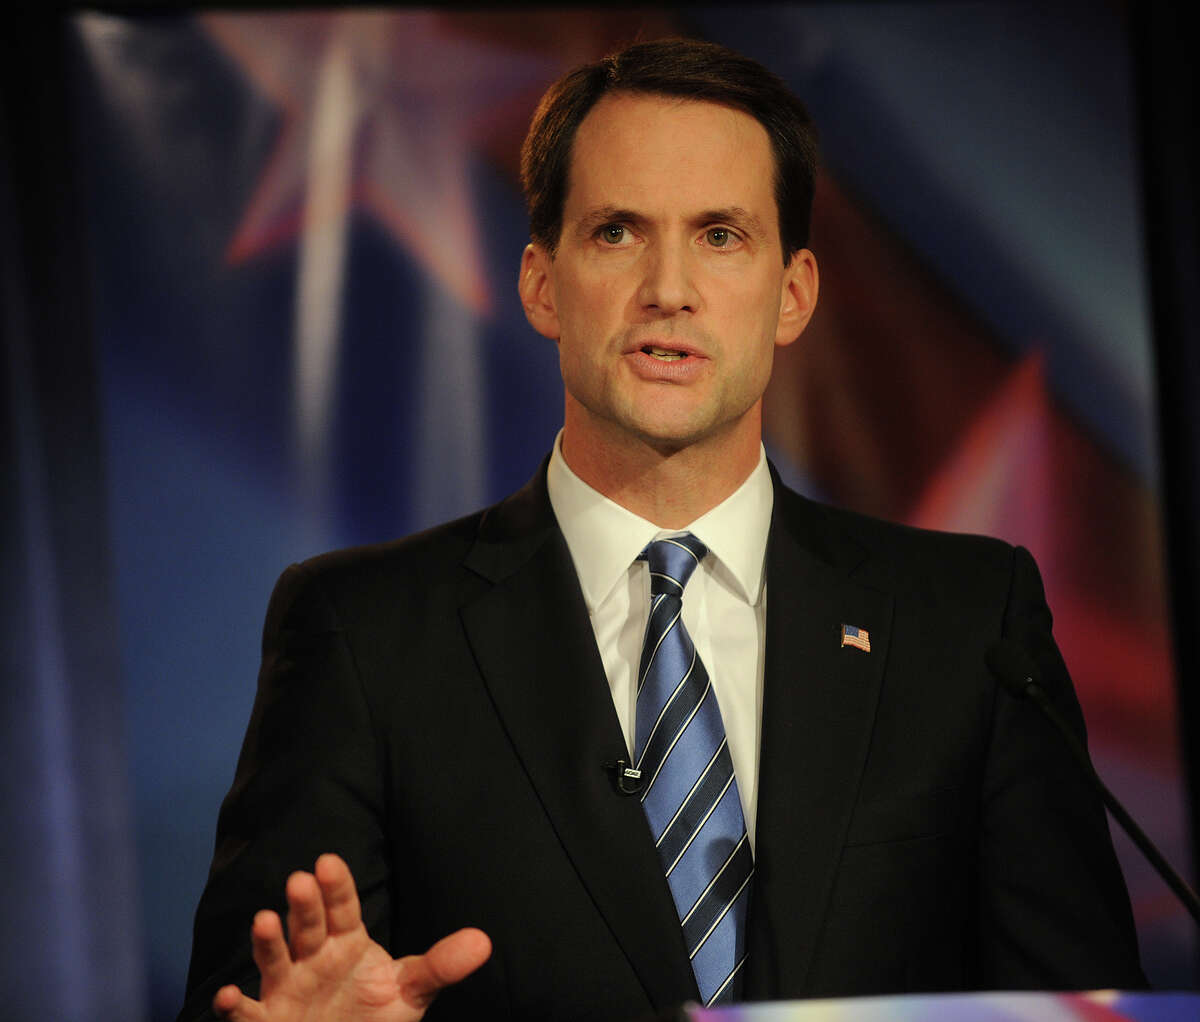 U.S. Rep. Jim Himes responds top a question during the U.S. Congressional Fourth District Debate at the Norwalk Inn & Conference Center in Norwalk on Thursday, October 18, 2012.